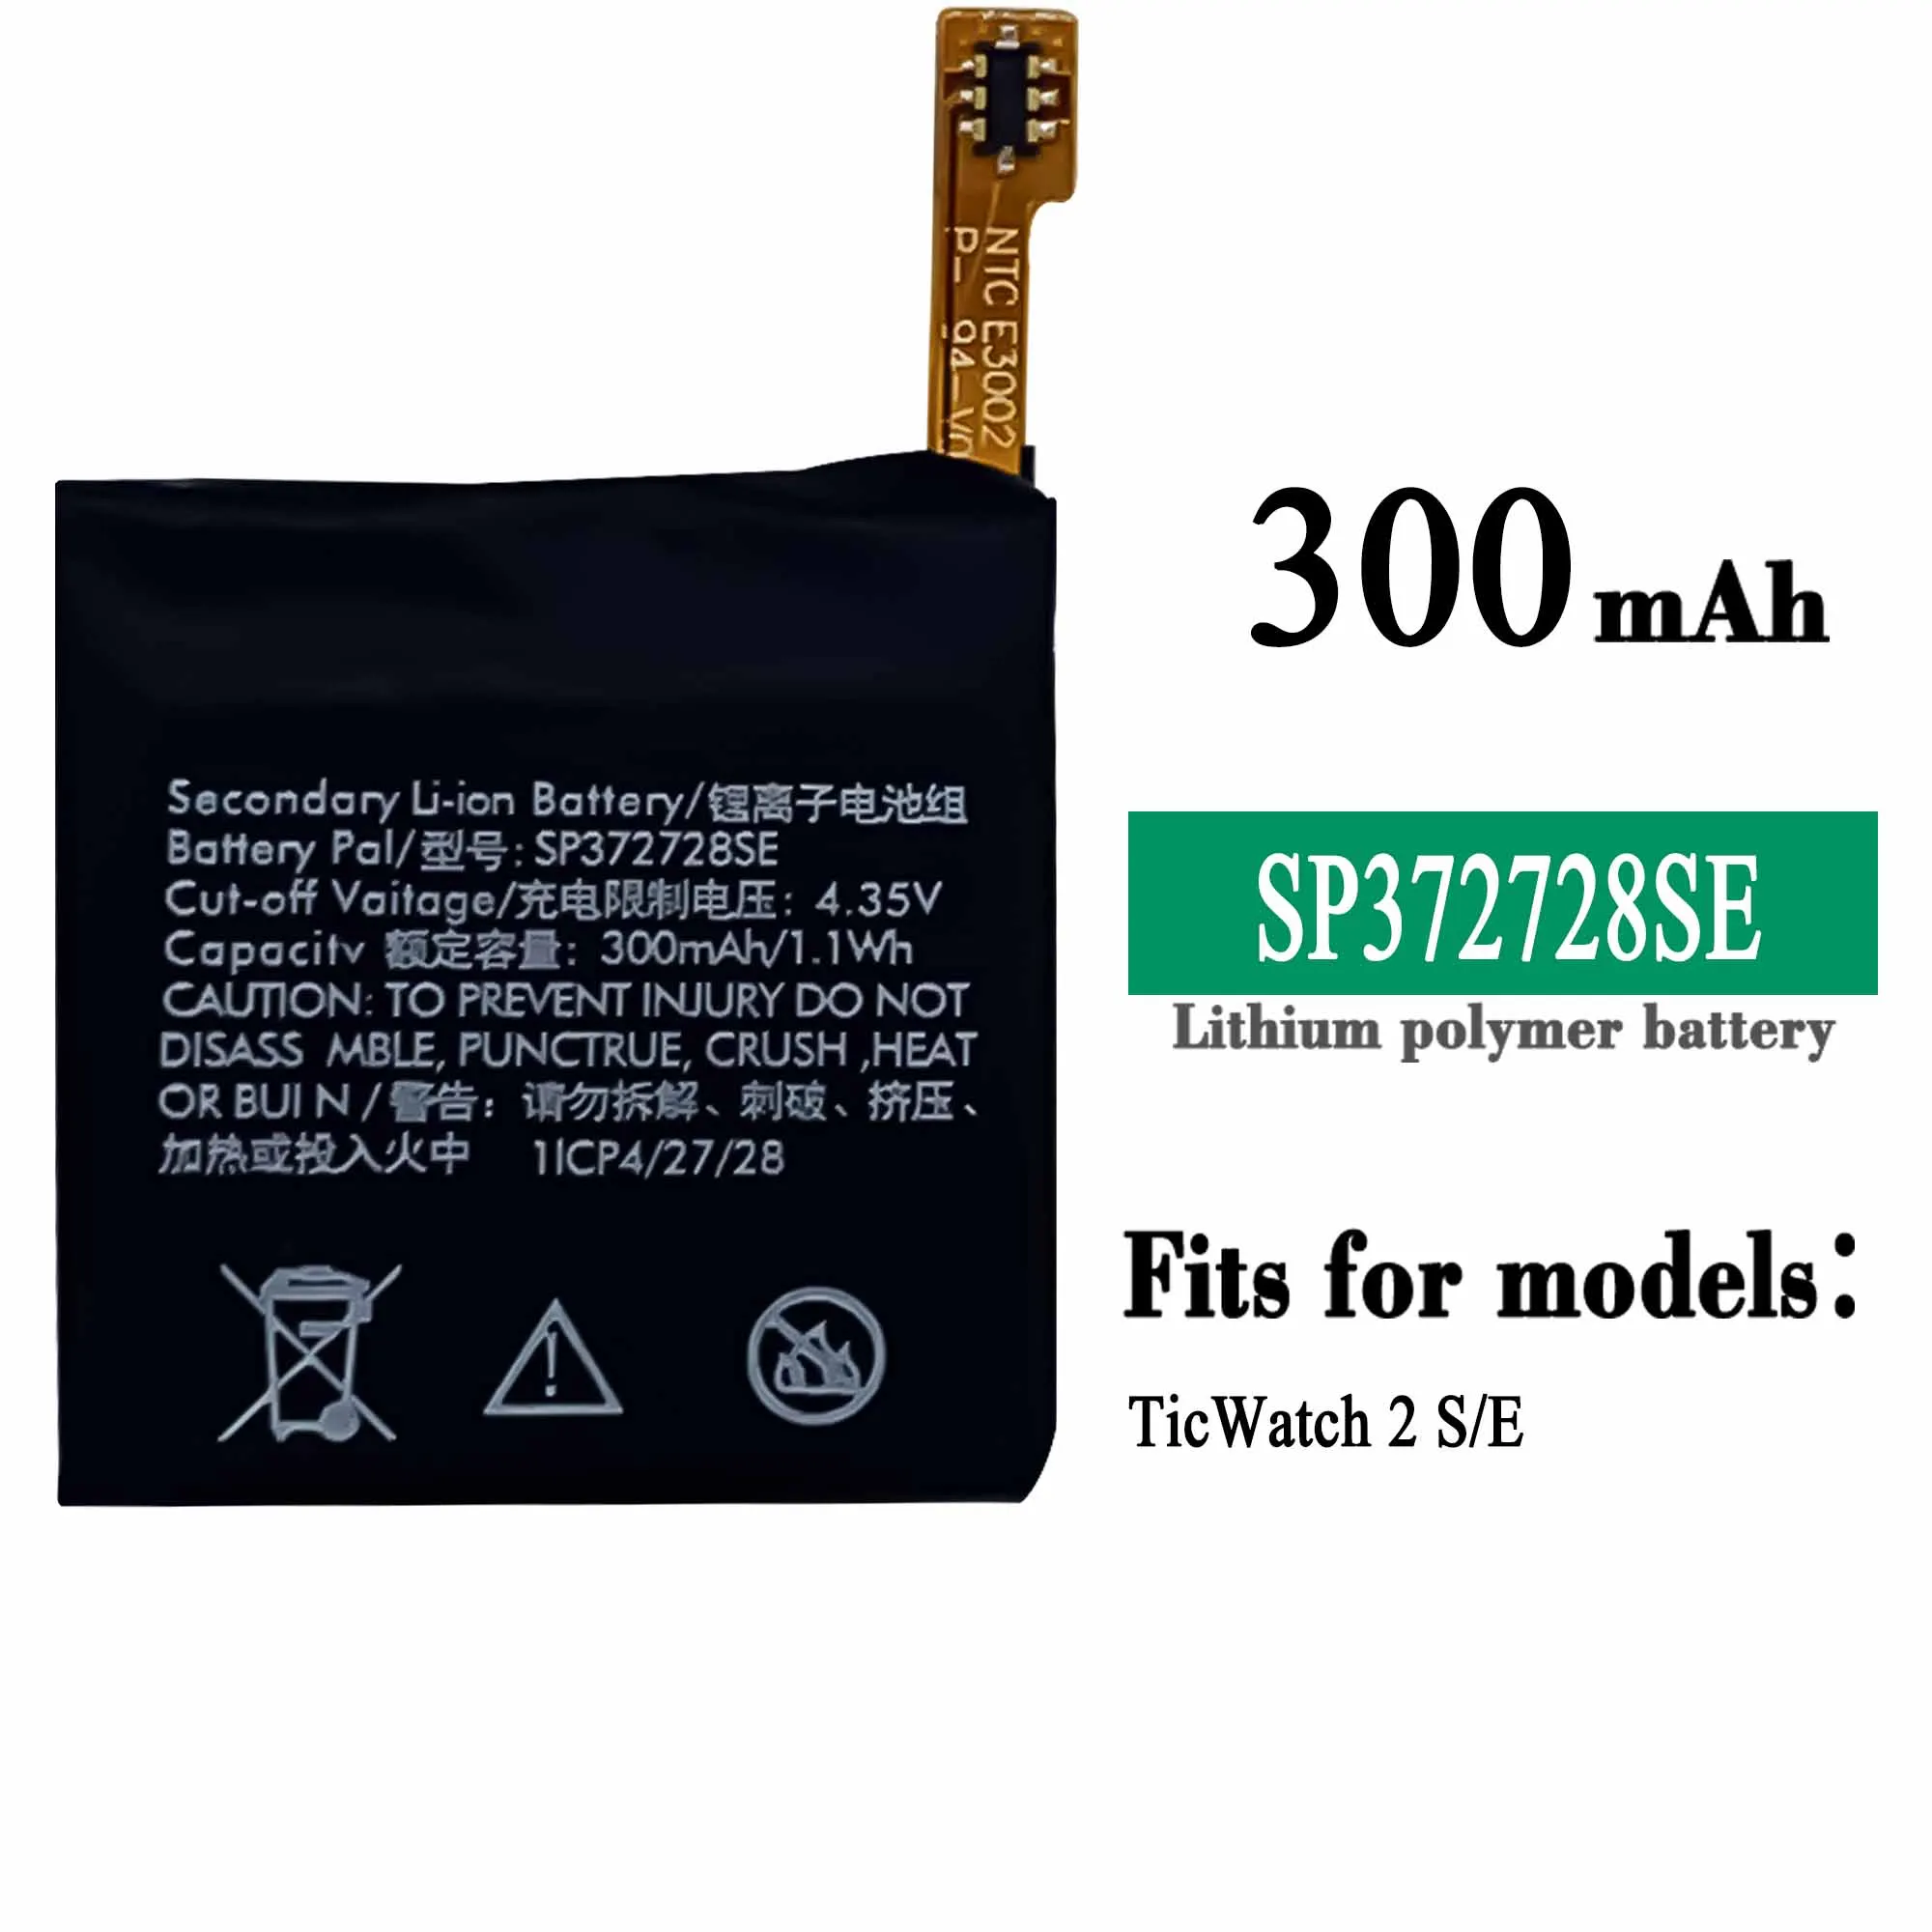 

Original Replacement Battery SP372728SE For Ticwatch 2 Ticwatch2 Ticwatch Express WE11056 300mAh 1.1wh 4.35V